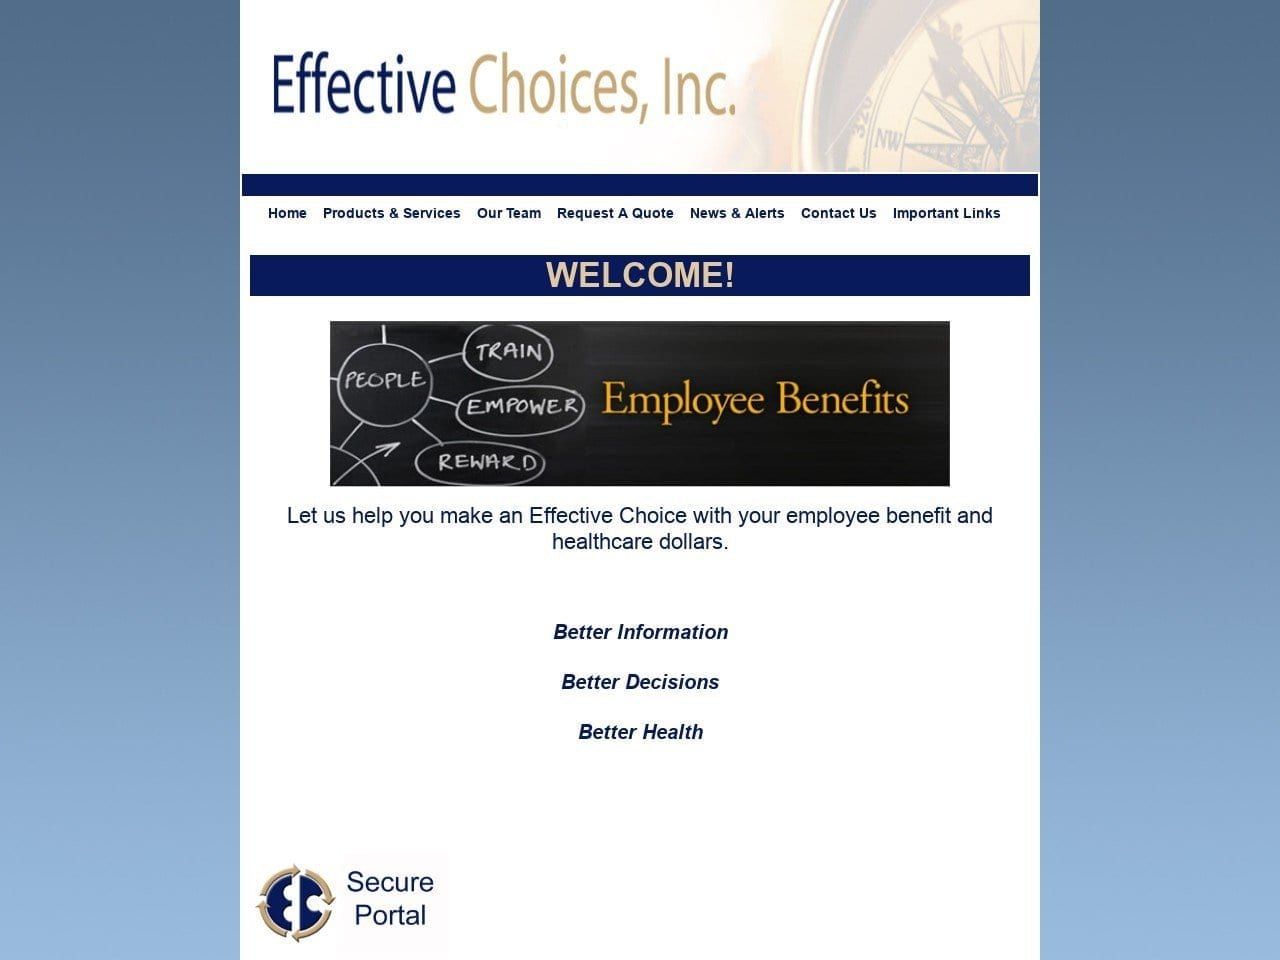 Effective Choices Inc Website Screenshot from effectivechoices.com